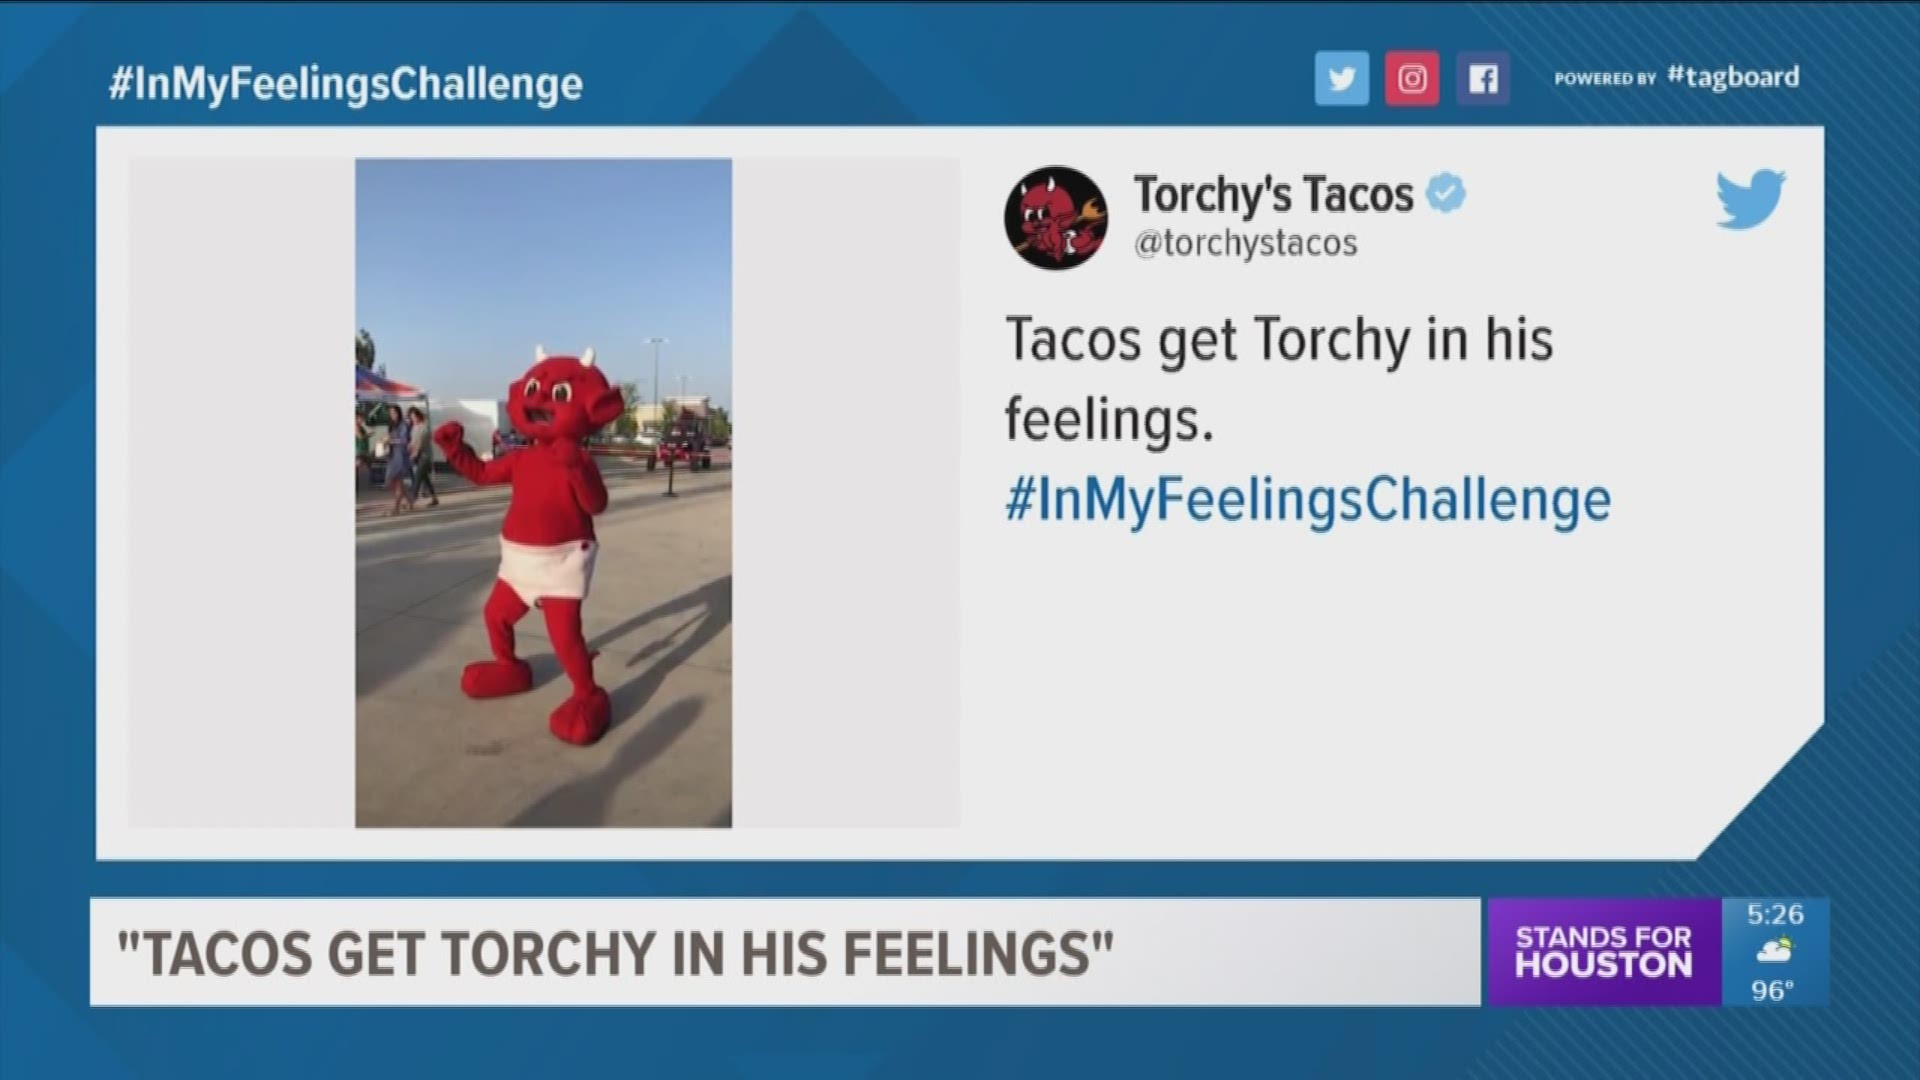 Just about everyone and everything is taking on the 'In My Feelings' challenge. We saw the moves from Astros all-stars Justin Verlander and Alex Bregman, but how about Torchy's Tacos devil?